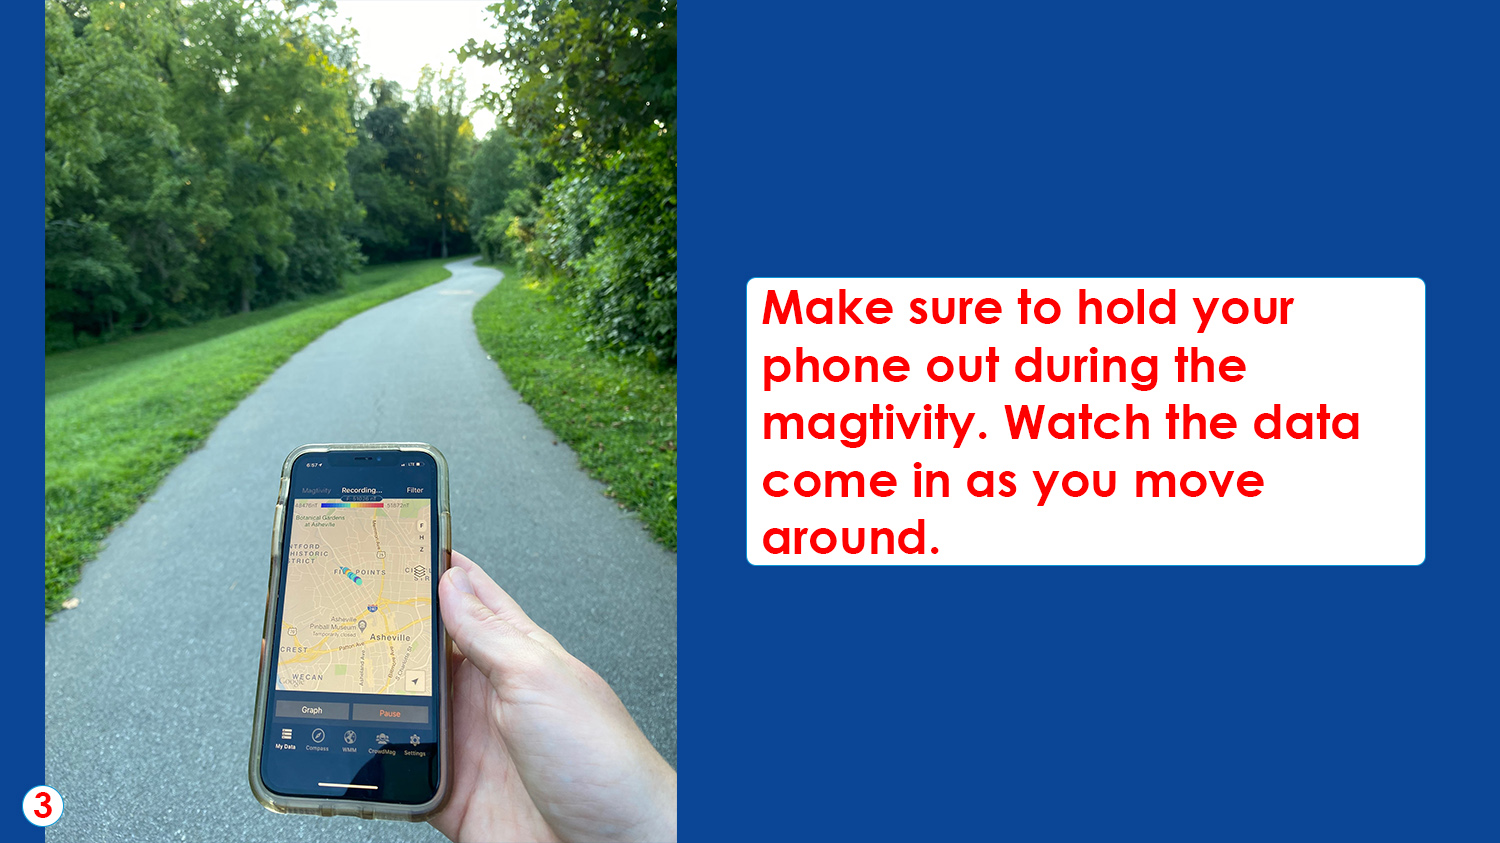 Make sure to hold your phone out during the magtivity. Watch the data come in as you move around.